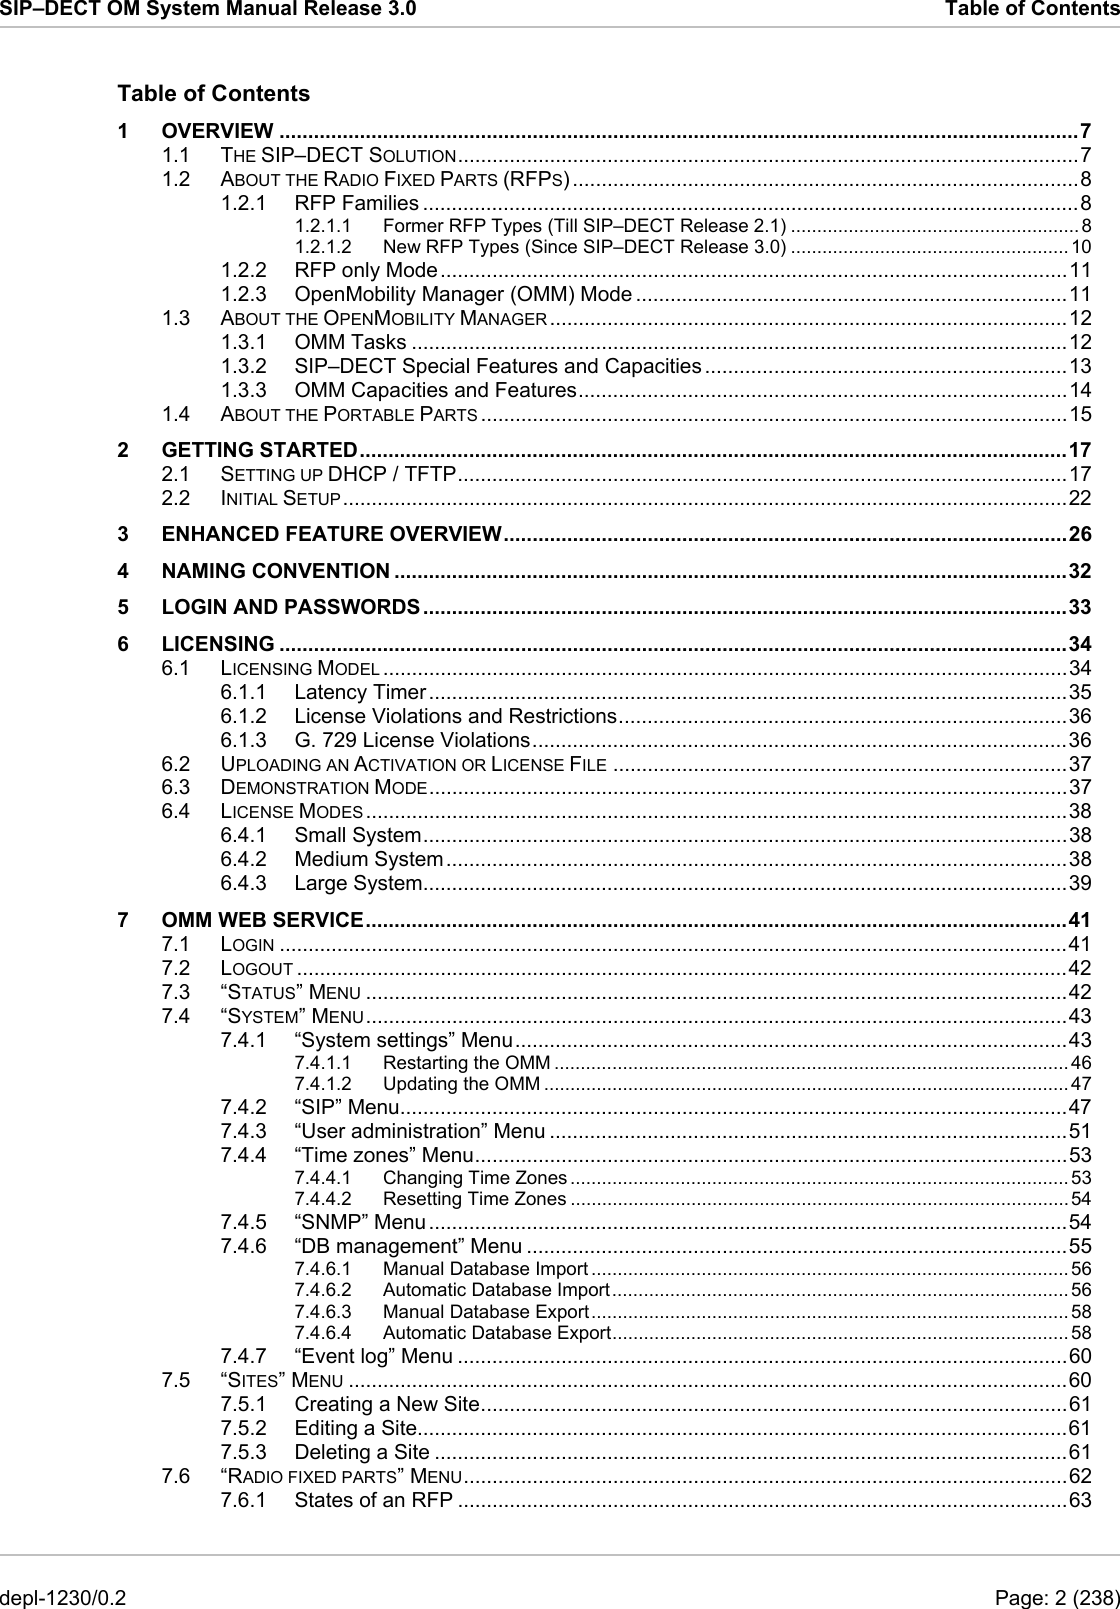 SIP–DECT OM System Manual Release 3.0  Table of Contents Table of Contents 1 OVERVIEW ...........................................................................................................................................7 1.1 THE SIP–DECT SOLUTION............................................................................................................7 1.2 ABOUT THE RADIO FIXED PARTS (RFPS) ........................................................................................8 1.2.1 RFP Families ..................................................................................................................8 1.2.1.1 Former RFP Types (Till SIP–DECT Release 2.1) .......................................................8 1.2.1.2 New RFP Types (Since SIP–DECT Release 3.0) .....................................................10 1.2.2 RFP only Mode.............................................................................................................11 1.2.3 OpenMobility Manager (OMM) Mode ...........................................................................11 1.3 ABOUT THE OPENMOBILITY MANAGER ..........................................................................................12 1.3.1 OMM Tasks ..................................................................................................................12 1.3.2 SIP–DECT Special Features and Capacities ...............................................................13 1.3.3 OMM Capacities and Features.....................................................................................14 1.4 ABOUT THE PORTABLE PARTS ......................................................................................................15 2 GETTING STARTED...........................................................................................................................17 2.1 SETTING UP DHCP / TFTP..........................................................................................................17 2.2 INITIAL SETUP..............................................................................................................................22 3 ENHANCED FEATURE OVERVIEW..................................................................................................26 4 NAMING CONVENTION .....................................................................................................................32 5 LOGIN AND PASSWORDS................................................................................................................33 6 LICENSING .........................................................................................................................................34 6.1 LICENSING MODEL .......................................................................................................................34 6.1.1 Latency Timer...............................................................................................................35 6.1.2 License Violations and Restrictions..............................................................................36 6.1.3 G. 729 License Violations.............................................................................................36 6.2 UPLOADING AN ACTIVATION OR LICENSE FILE ...............................................................................37 6.3 DEMONSTRATION MODE...............................................................................................................37 6.4 LICENSE MODES ..........................................................................................................................38 6.4.1 Small System................................................................................................................38 6.4.2 Medium System............................................................................................................38 6.4.3 Large System................................................................................................................39 7 OMM WEB SERVICE..........................................................................................................................41 7.1 LOGIN .........................................................................................................................................41 7.2 LOGOUT ......................................................................................................................................42 7.3 “STATUS” MENU ..........................................................................................................................42 7.4 “SYSTEM” MENU..........................................................................................................................43 7.4.1 “System settings” Menu................................................................................................43 7.4.1.1 Restarting the OMM .................................................................................................. 46 7.4.1.2 Updating the OMM ....................................................................................................47 7.4.2 “SIP” Menu....................................................................................................................47 7.4.3 “User administration” Menu ..........................................................................................51 7.4.4 “Time zones” Menu.......................................................................................................53 7.4.4.1 Changing Time Zones ...............................................................................................53 7.4.4.2 Resetting Time Zones ...............................................................................................54 7.4.5 “SNMP” Menu...............................................................................................................54 7.4.6 “DB management” Menu ..............................................................................................55 7.4.6.1 Manual Database Import ........................................................................................... 56 7.4.6.2 Automatic Database Import....................................................................................... 56 7.4.6.3 Manual Database Export...........................................................................................58 7.4.6.4 Automatic Database Export....................................................................................... 58 7.4.7 “Event log” Menu ..........................................................................................................60 7.5 “SITES” MENU .............................................................................................................................60 7.5.1 Creating a New Site......................................................................................................61 7.5.2 Editing a Site.................................................................................................................61 7.5.3 Deleting a Site ..............................................................................................................61 7.6 “RADIO FIXED PARTS” MENU.........................................................................................................62 7.6.1 States of an RFP ..........................................................................................................63 depl-1230/0.2  Page: 2 (238) 